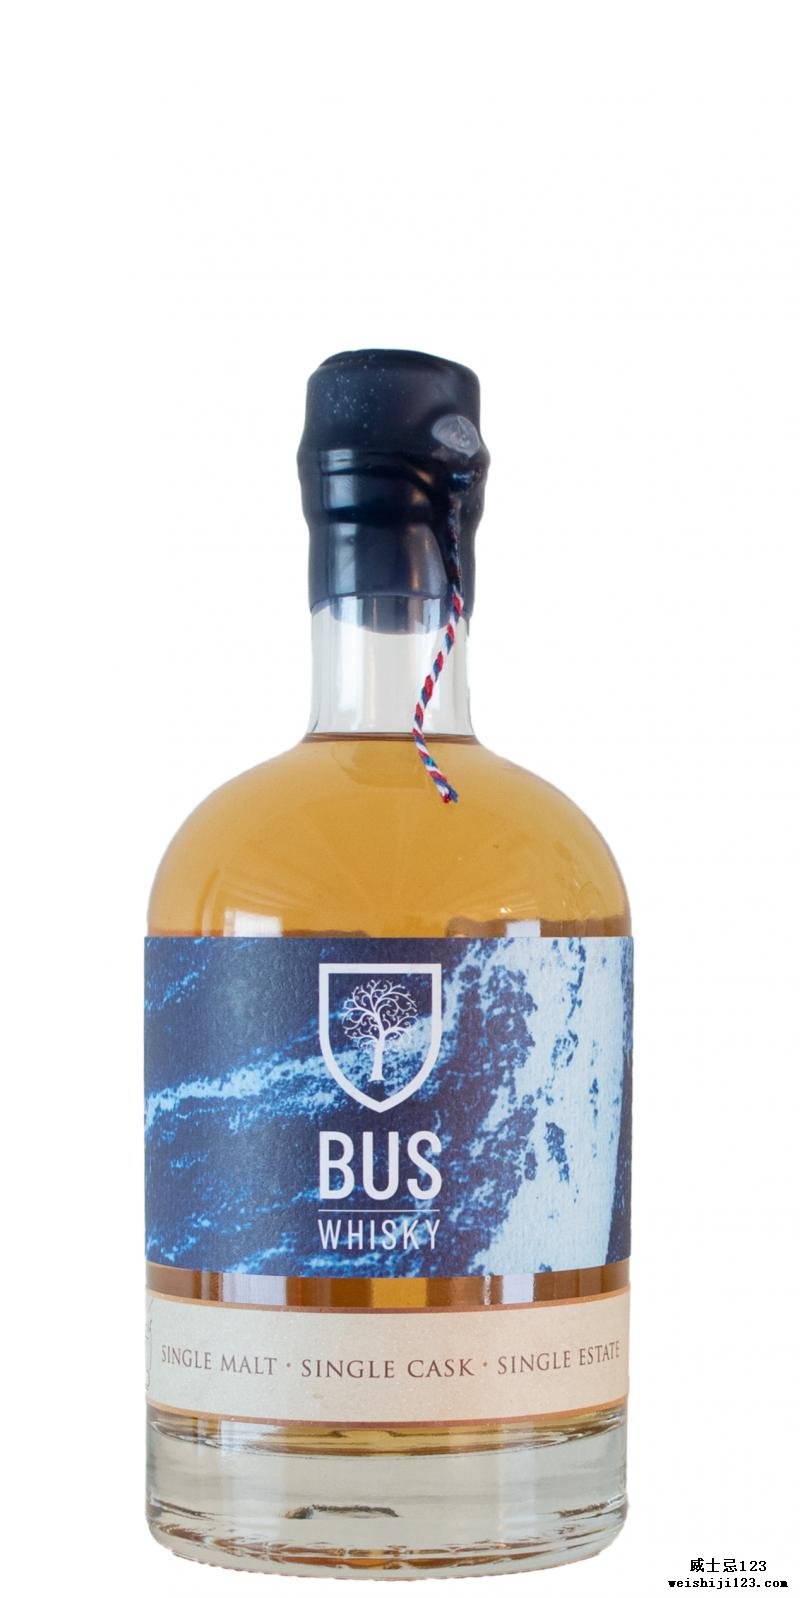 Bus Whisky 2015